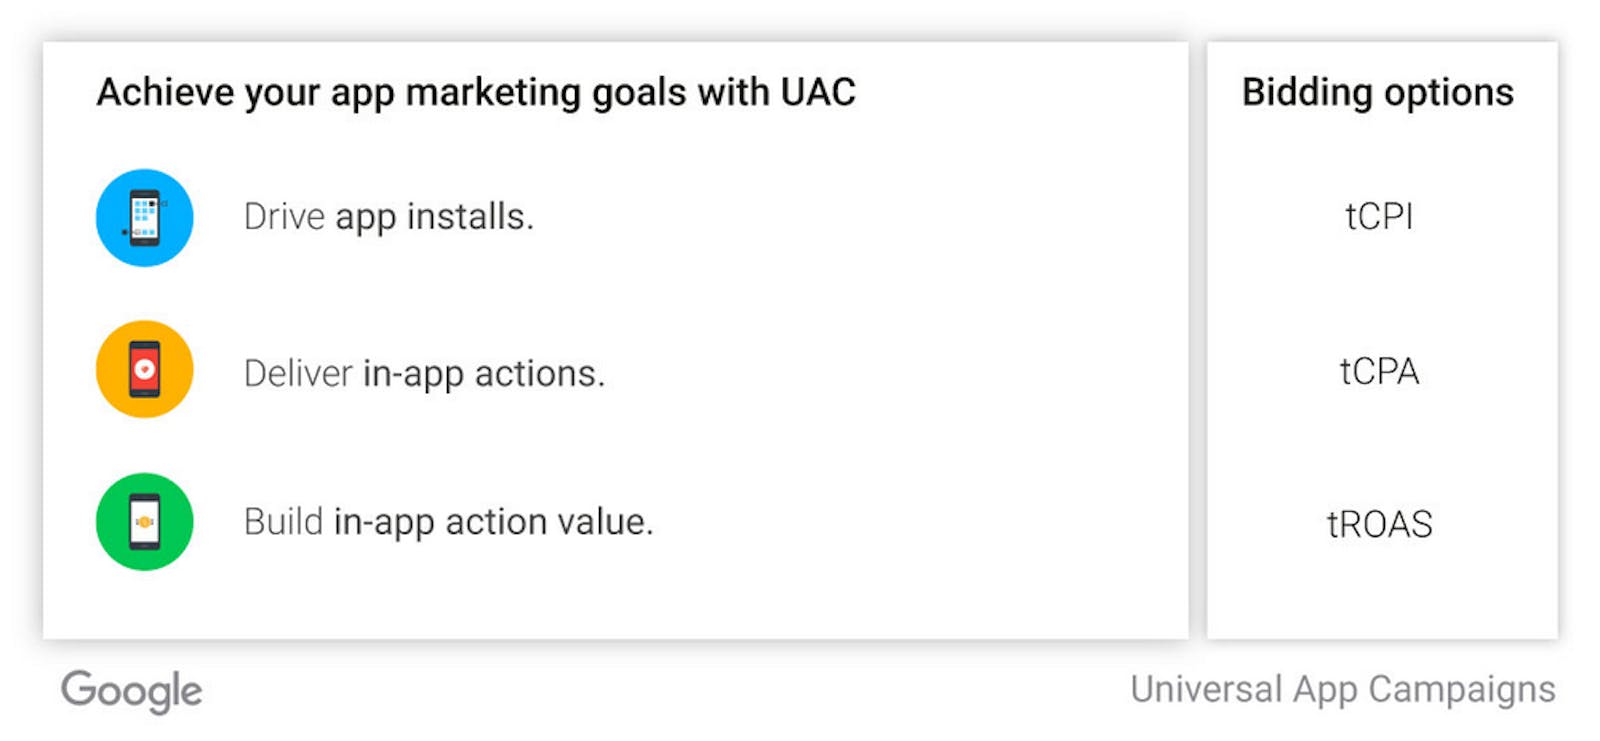 Achieve your app marketing goals with UAC - Universal App Campaigns 